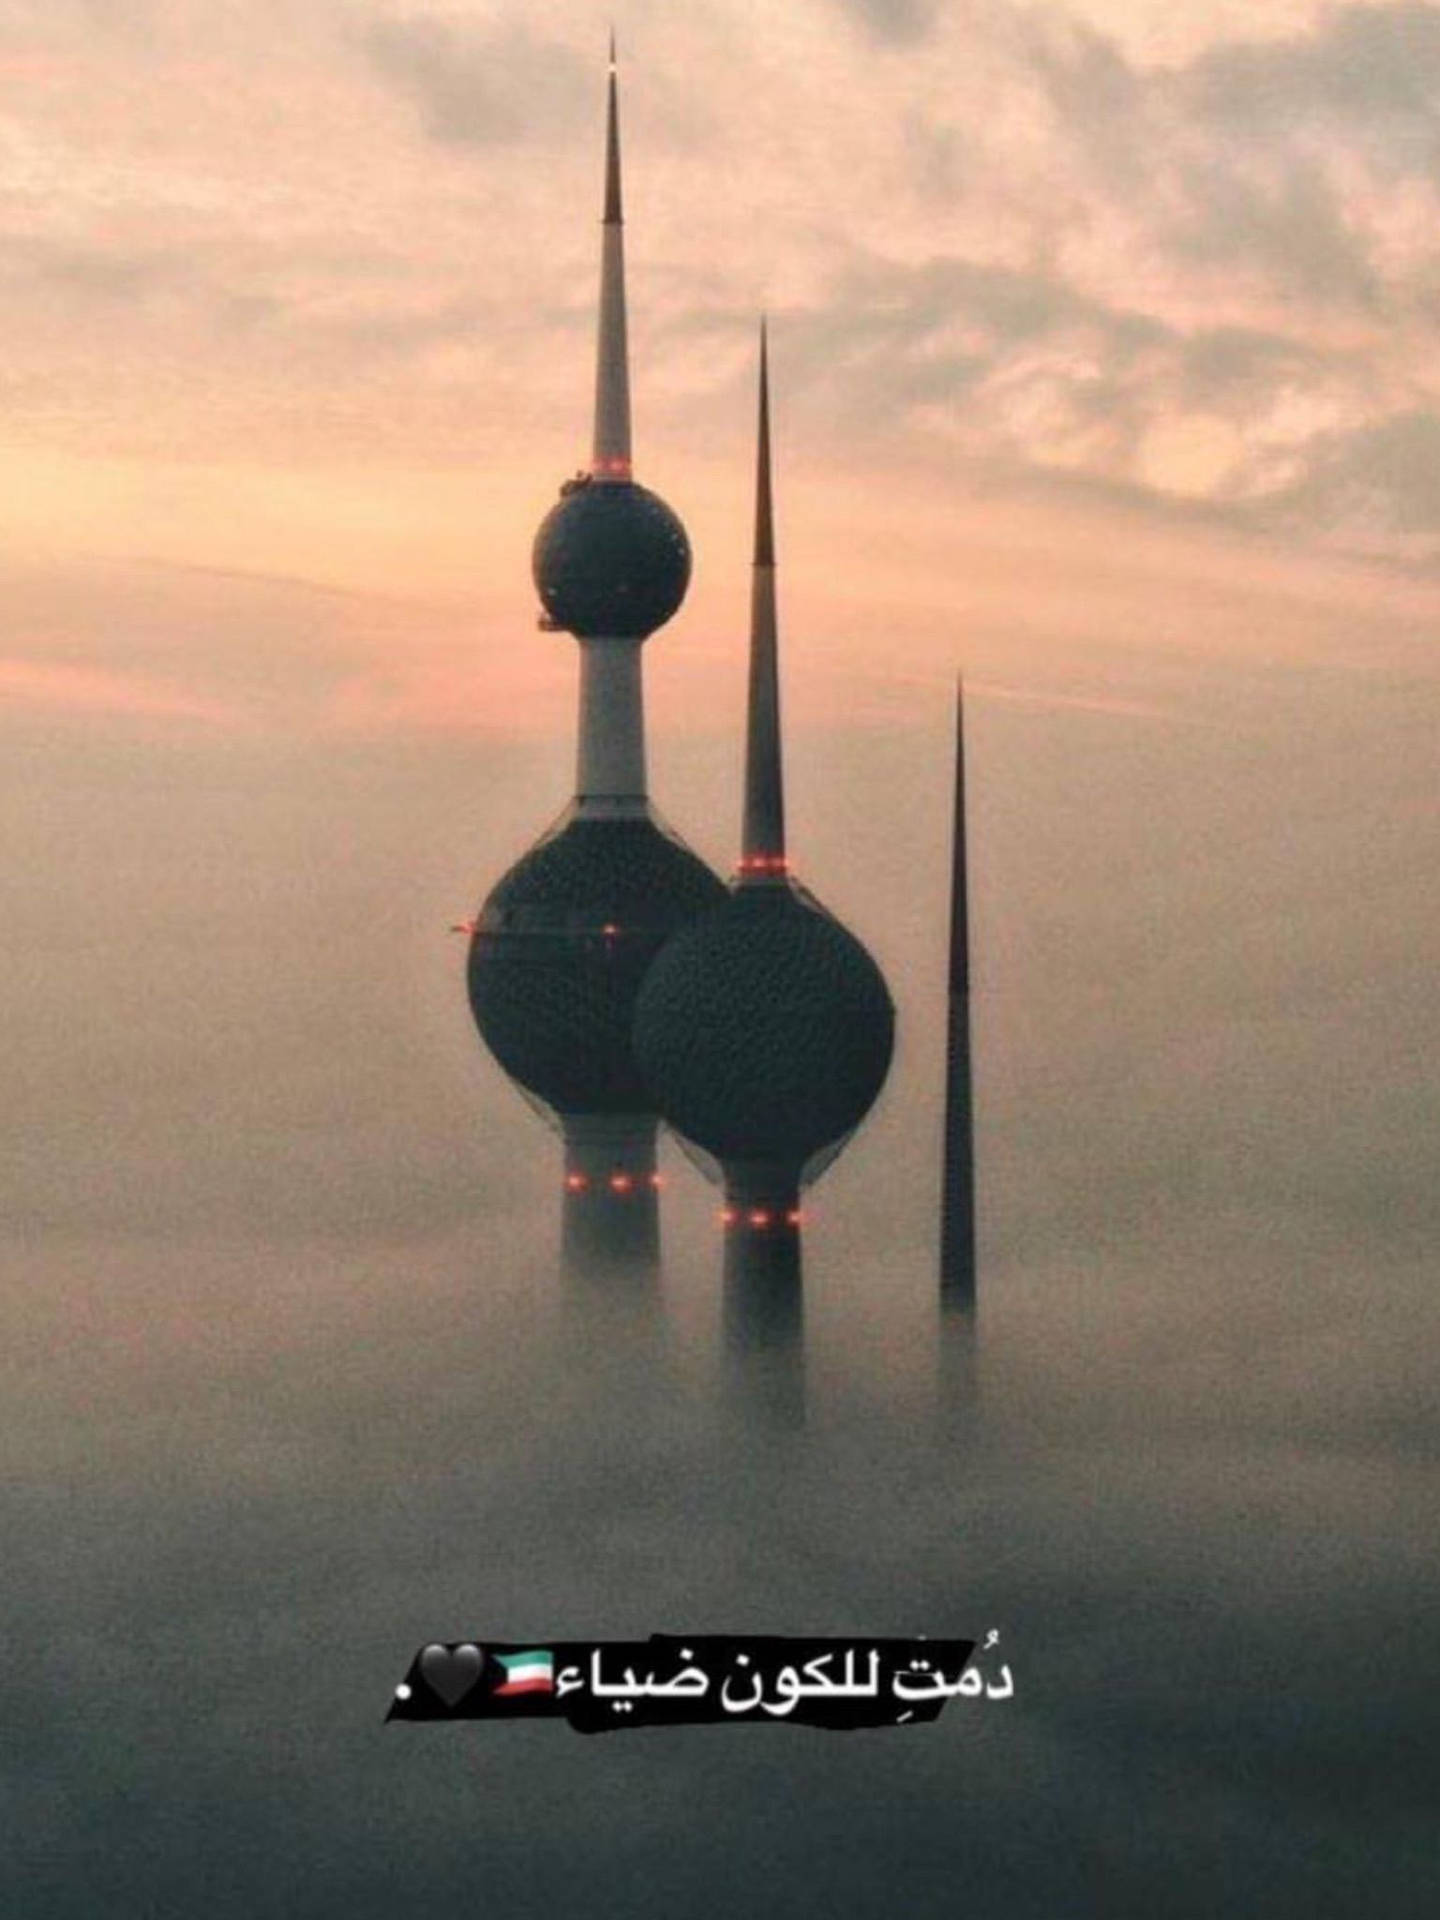 Kuwait Towers Piercing Through Clouds